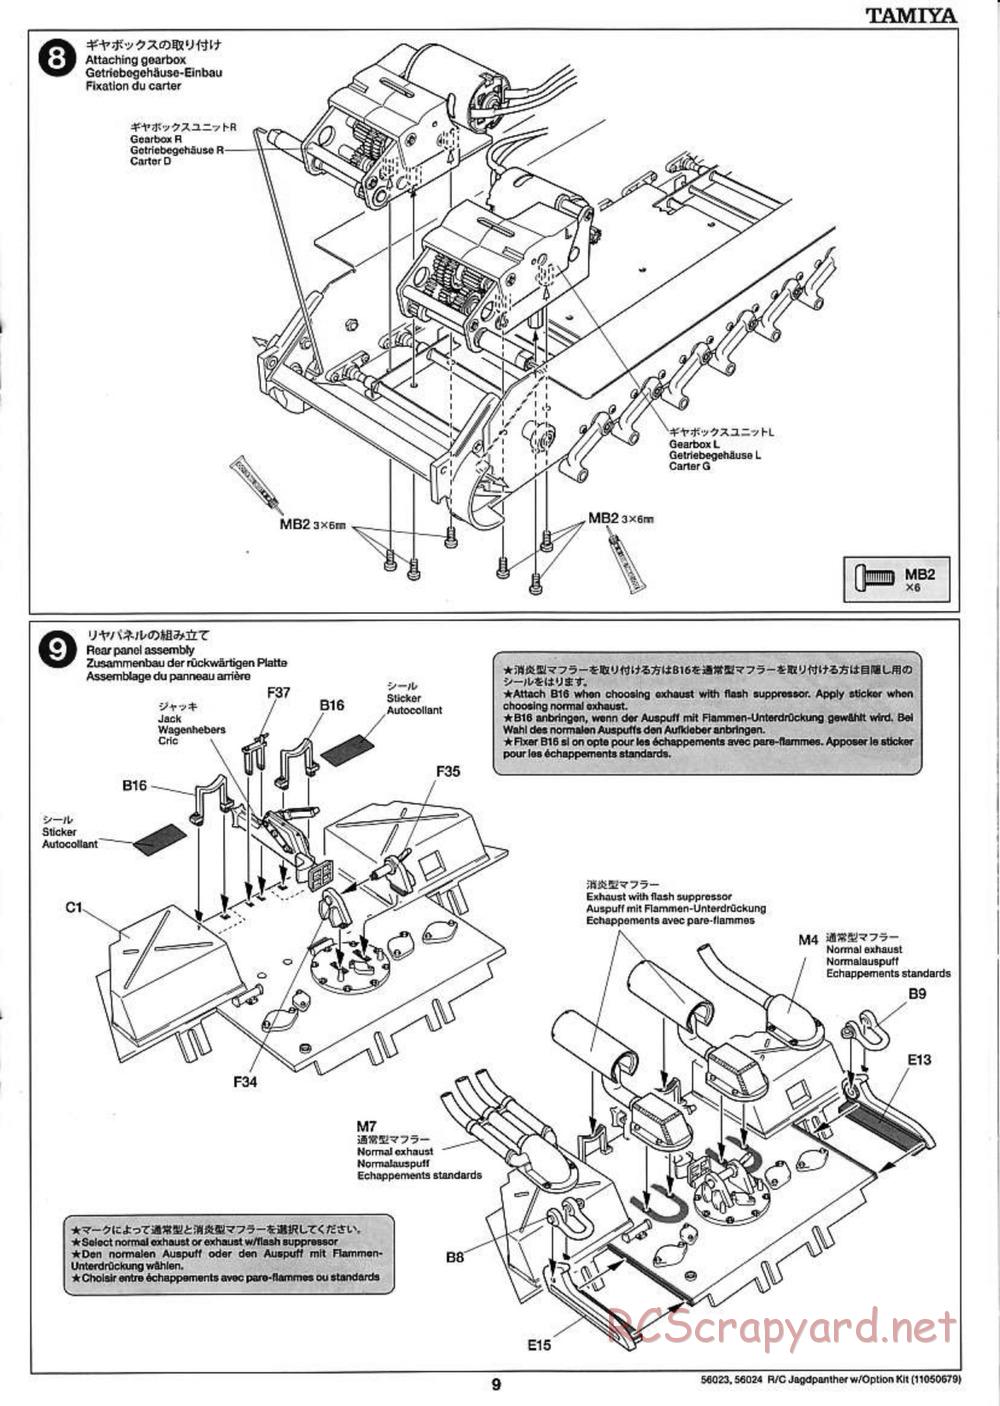 Tamiya - Jagdpanther - 1/16 Scale Chassis - Manual - Page 9